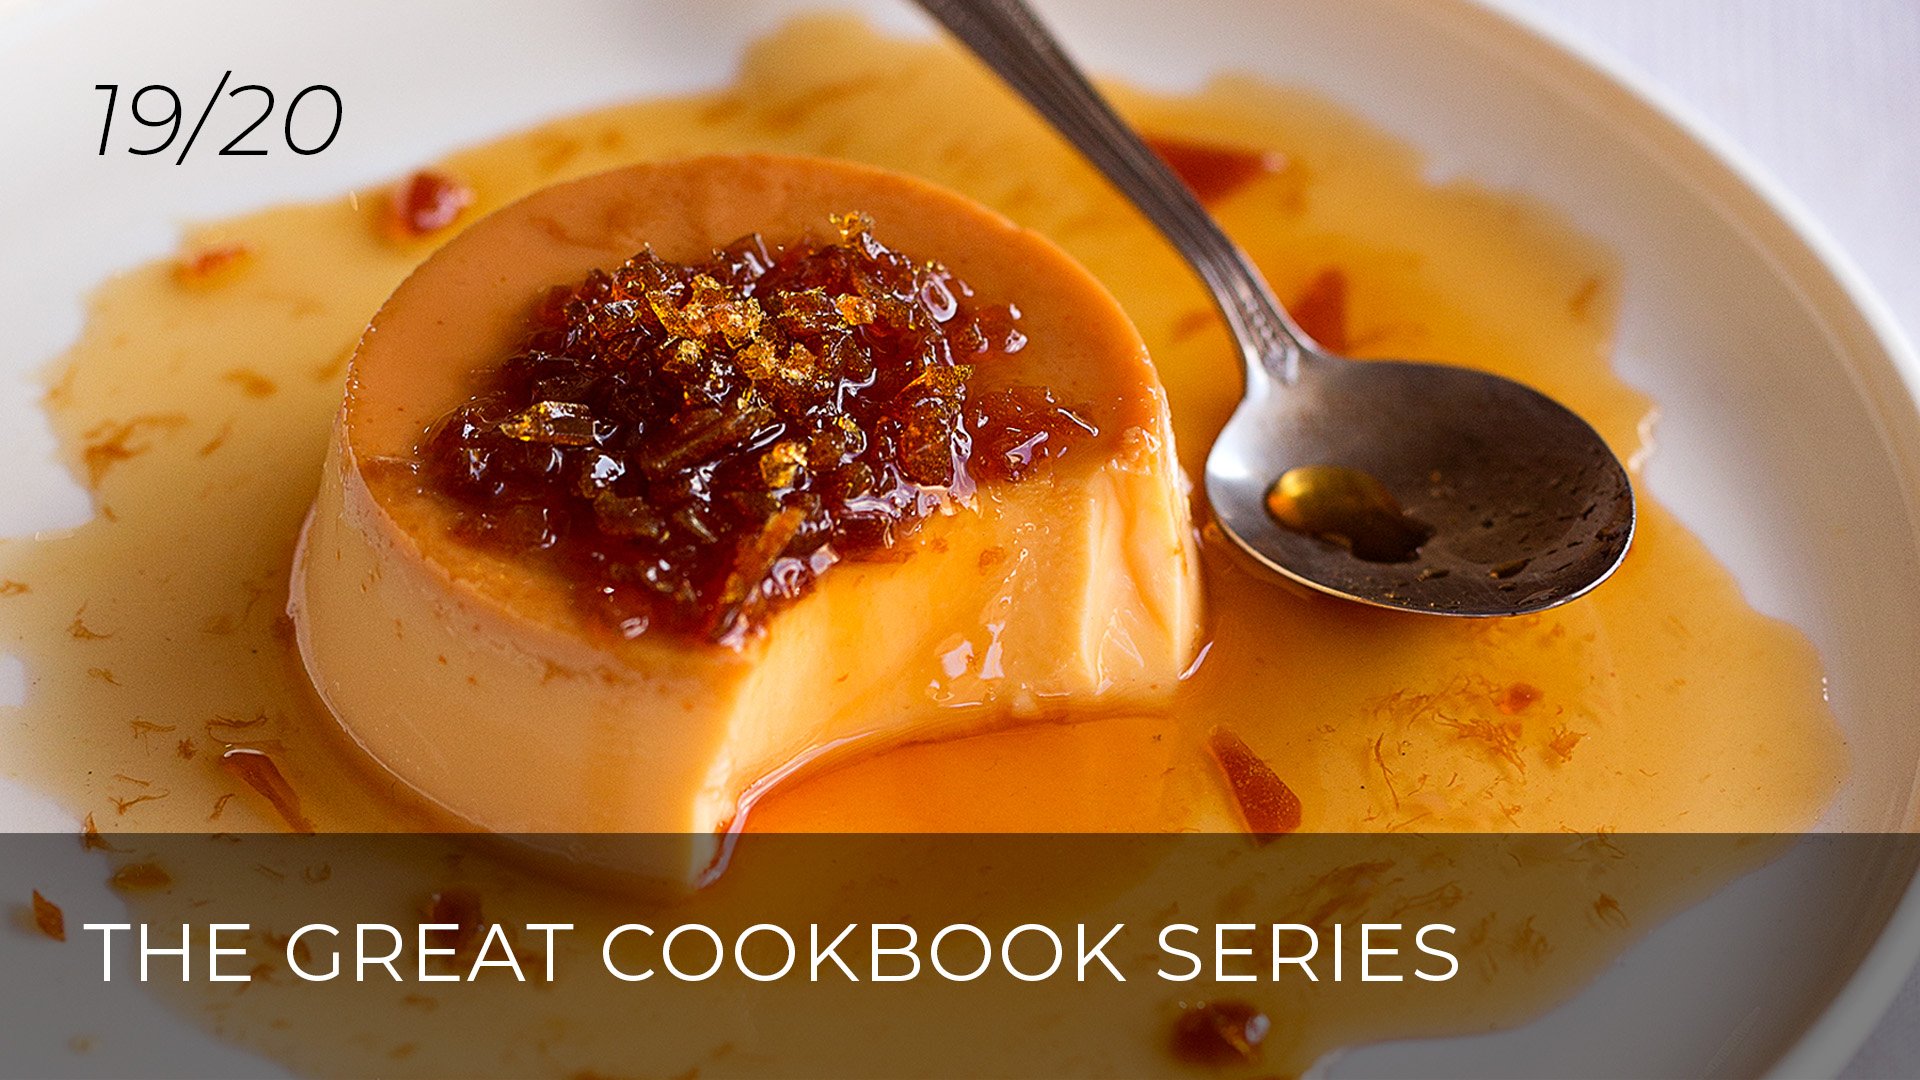 The Great Cookbook Series